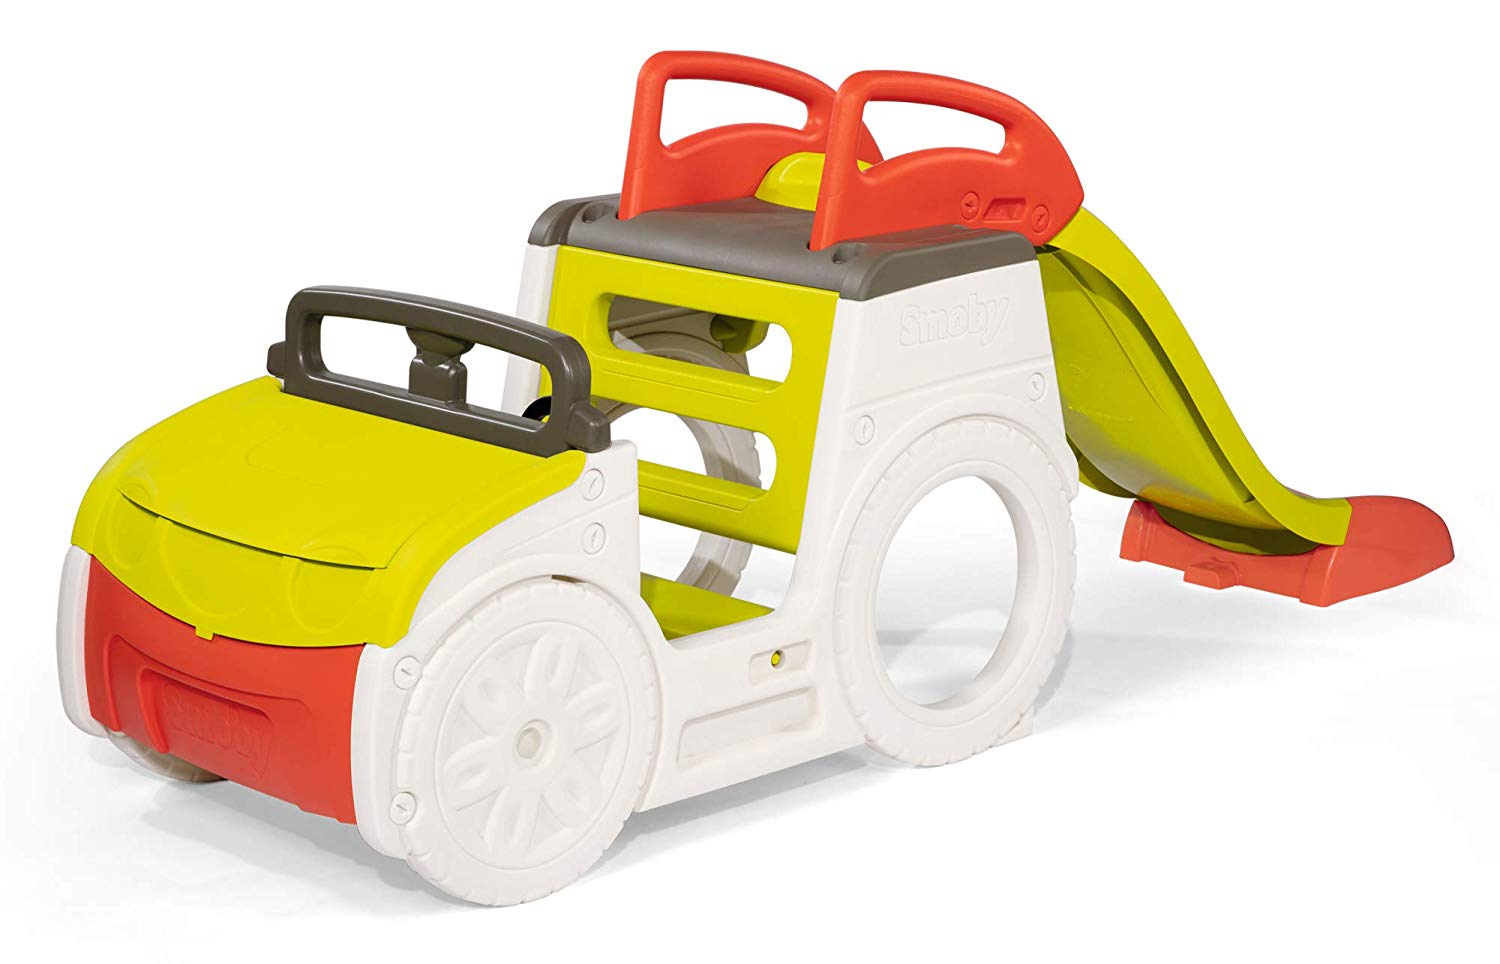 Smoby Area Activities With A Slide, Car Adventure (840205) Adventure Car -